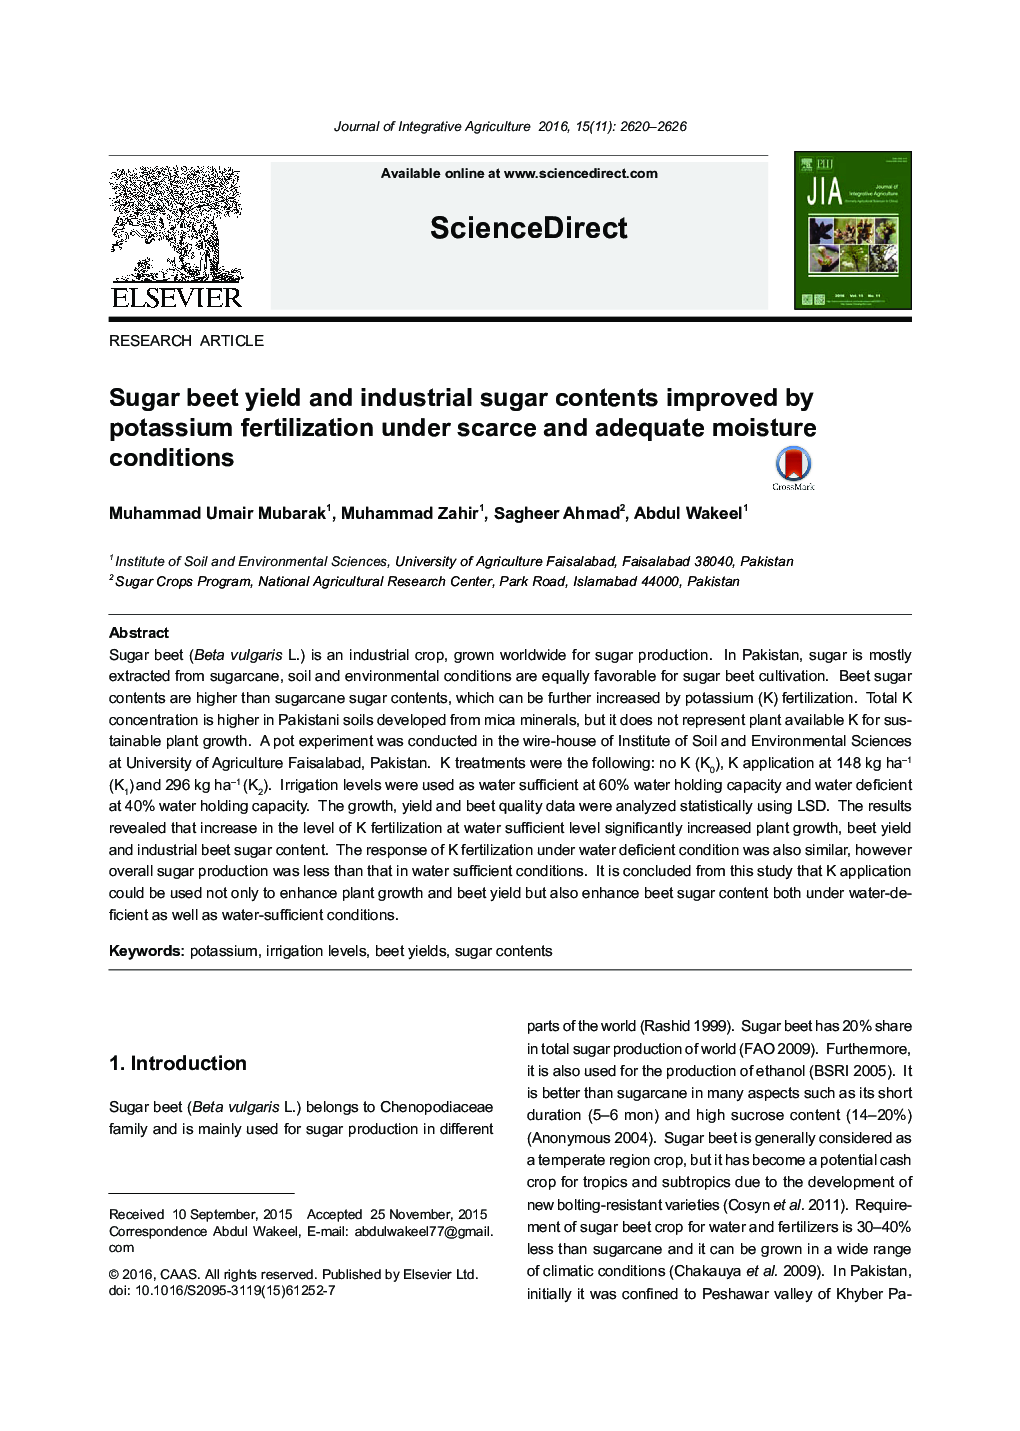 Sugar beet yield and industrial sugar contents improved by potassium fertilization under scarce and adequate moisture conditions